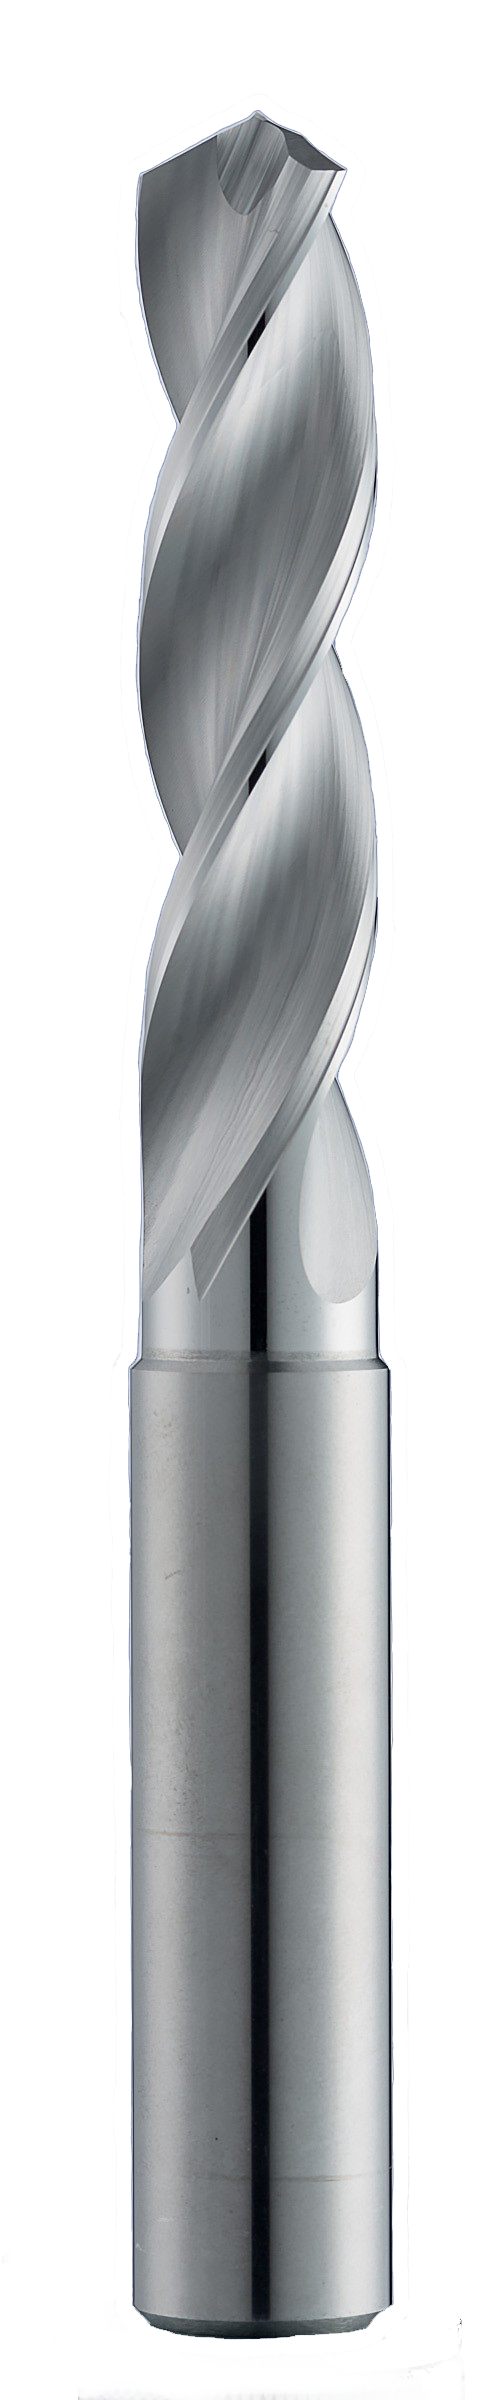 5.30mm Dia, 124 Degree Point, Solid Carbide Drill - 65023